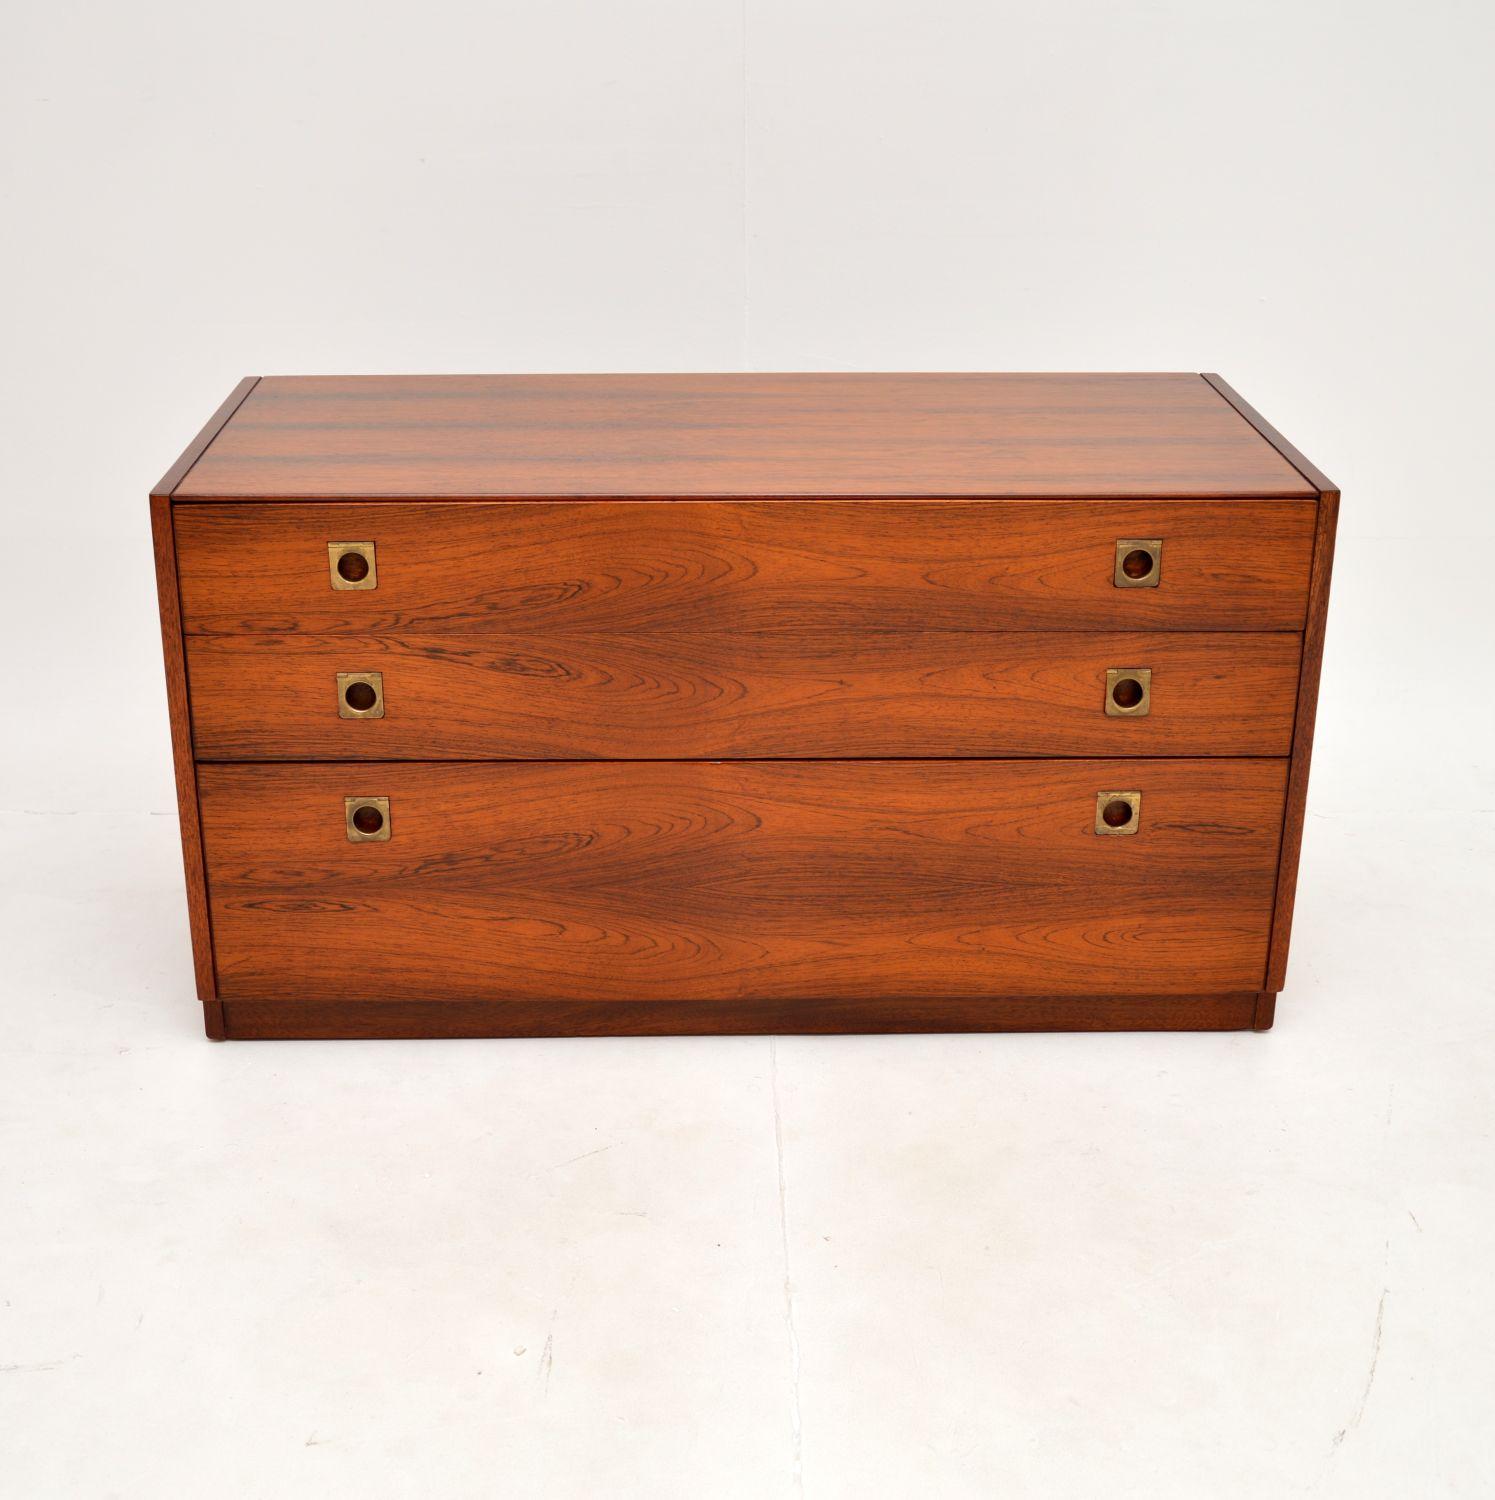 A stunning vintage low chest of drawers by Robert Heritage for Archie Shine. This was made in England, it dates from the 1960’s.

The quality is superb, this is extremely well made and is a useful size. The wood is beautifully bookmatched on the